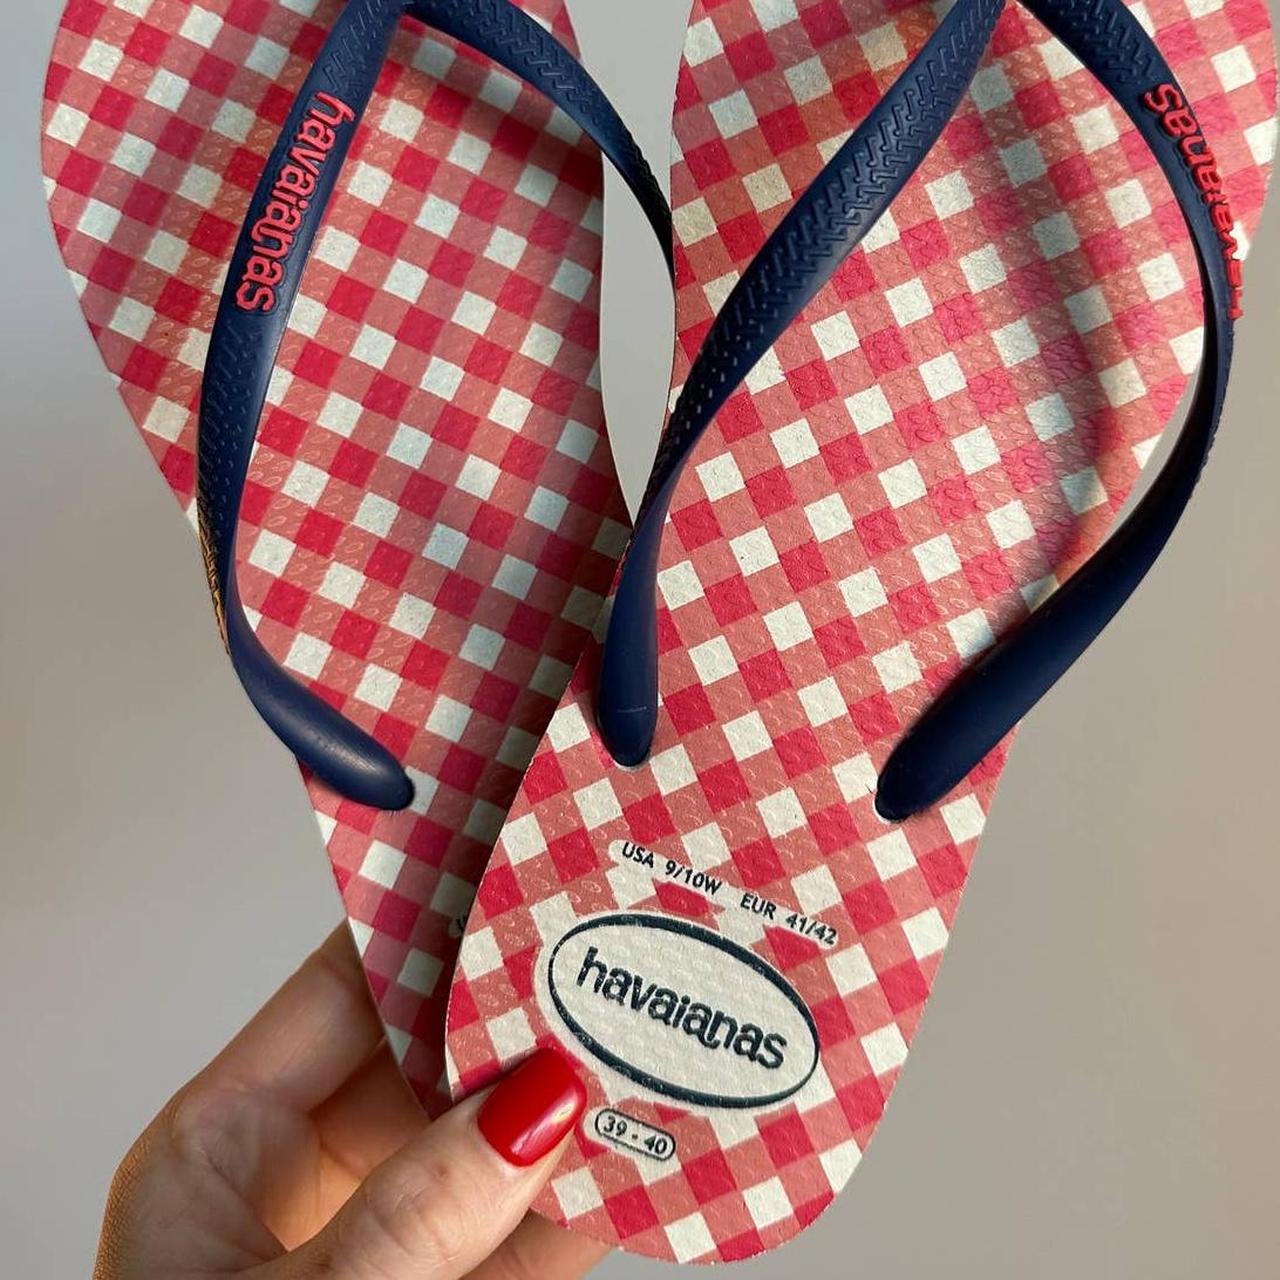 Havaianas Women's Red and White Flipflops (5)